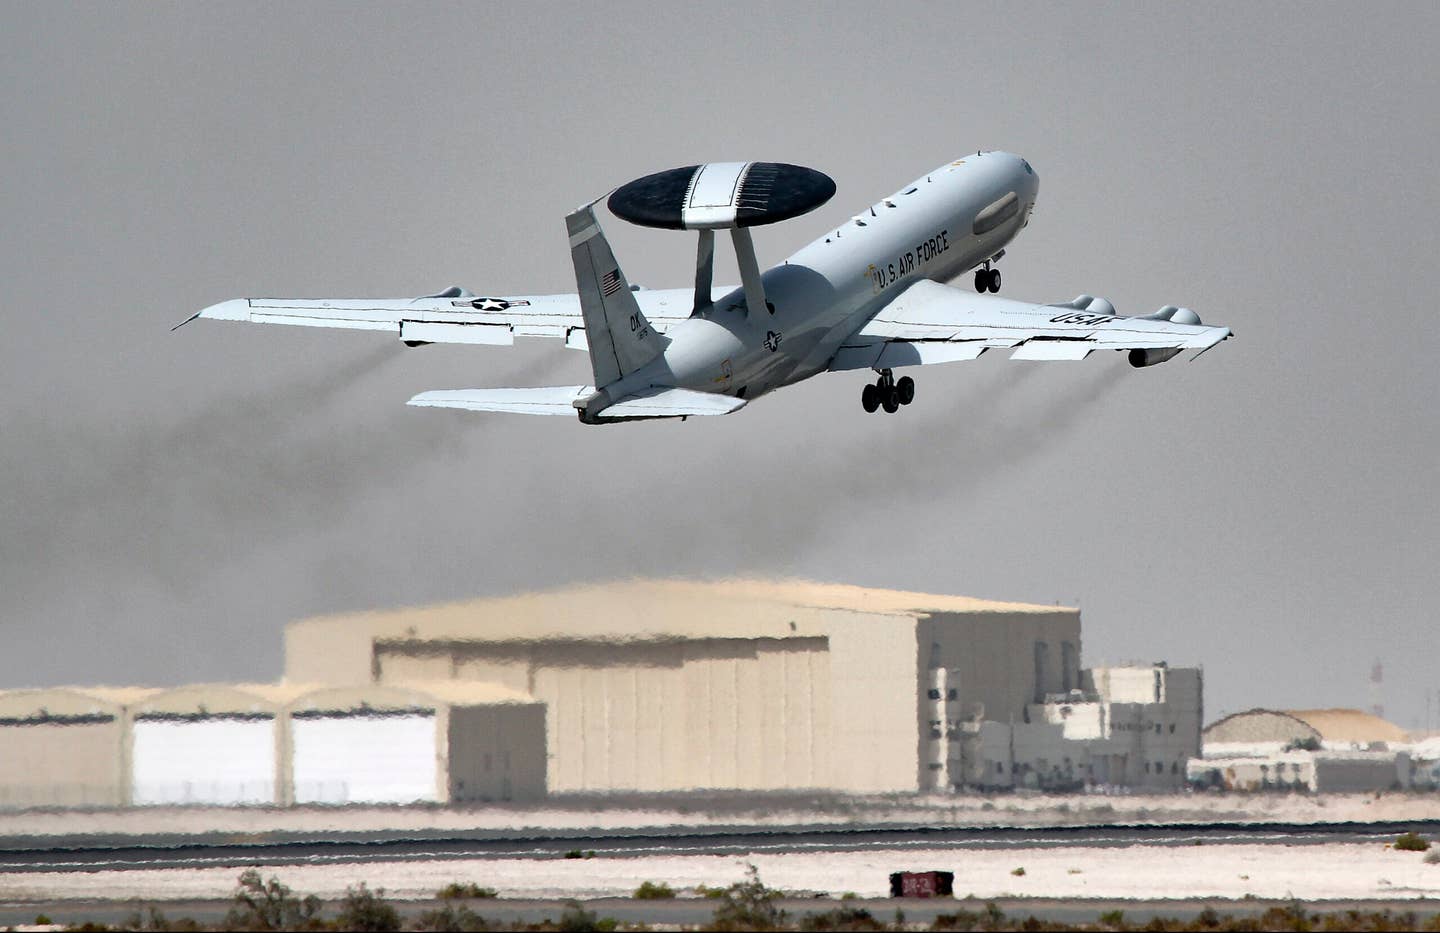 An U.S. Air Force E-3 Sentry takes off from Al Dhafra Air Base, United Arab Emirates, March 6, 2022. The E-3 is an airborne warning and control (AWACS) system aircraft with an integrated command and control battle management surveillance, target detection and tracking platform. (U.S. Air Force photo by Master Sgt. Dan Heaton)